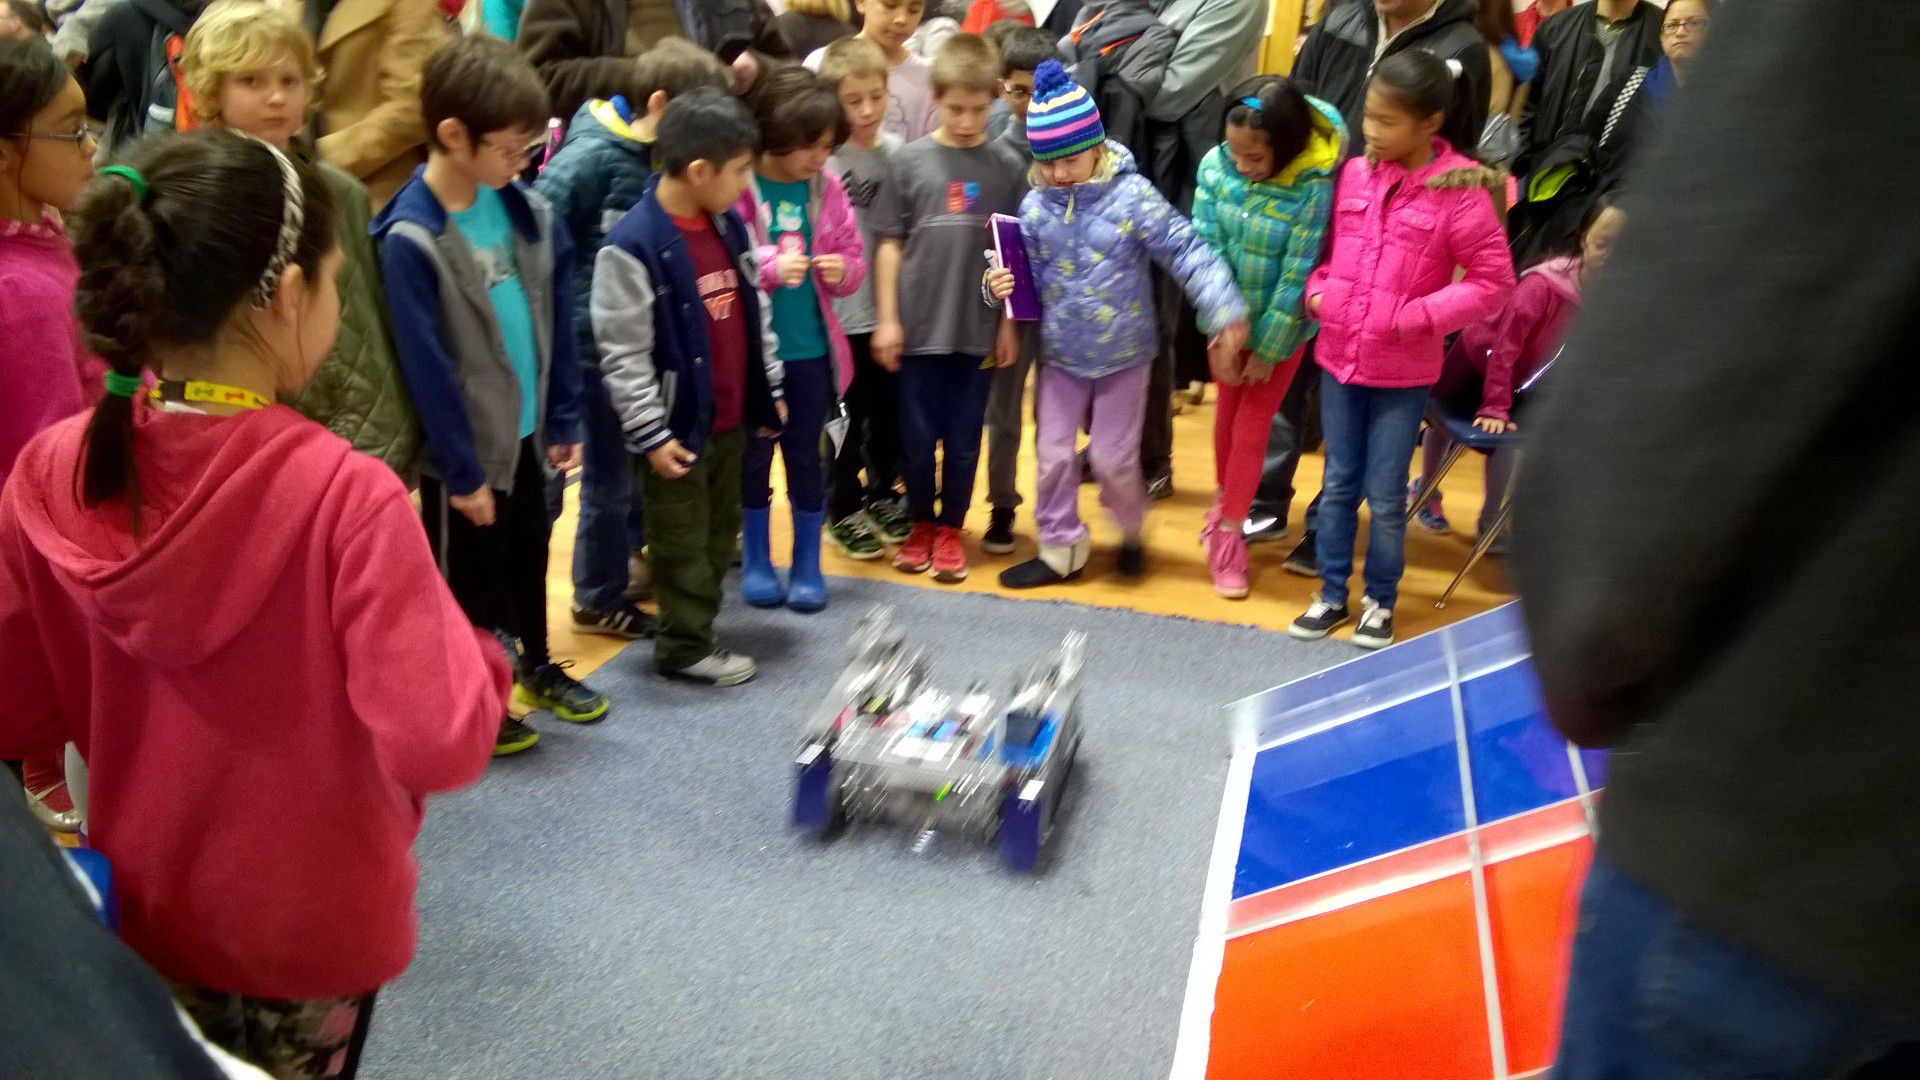 A crowd of children huddle around a robot in the center.